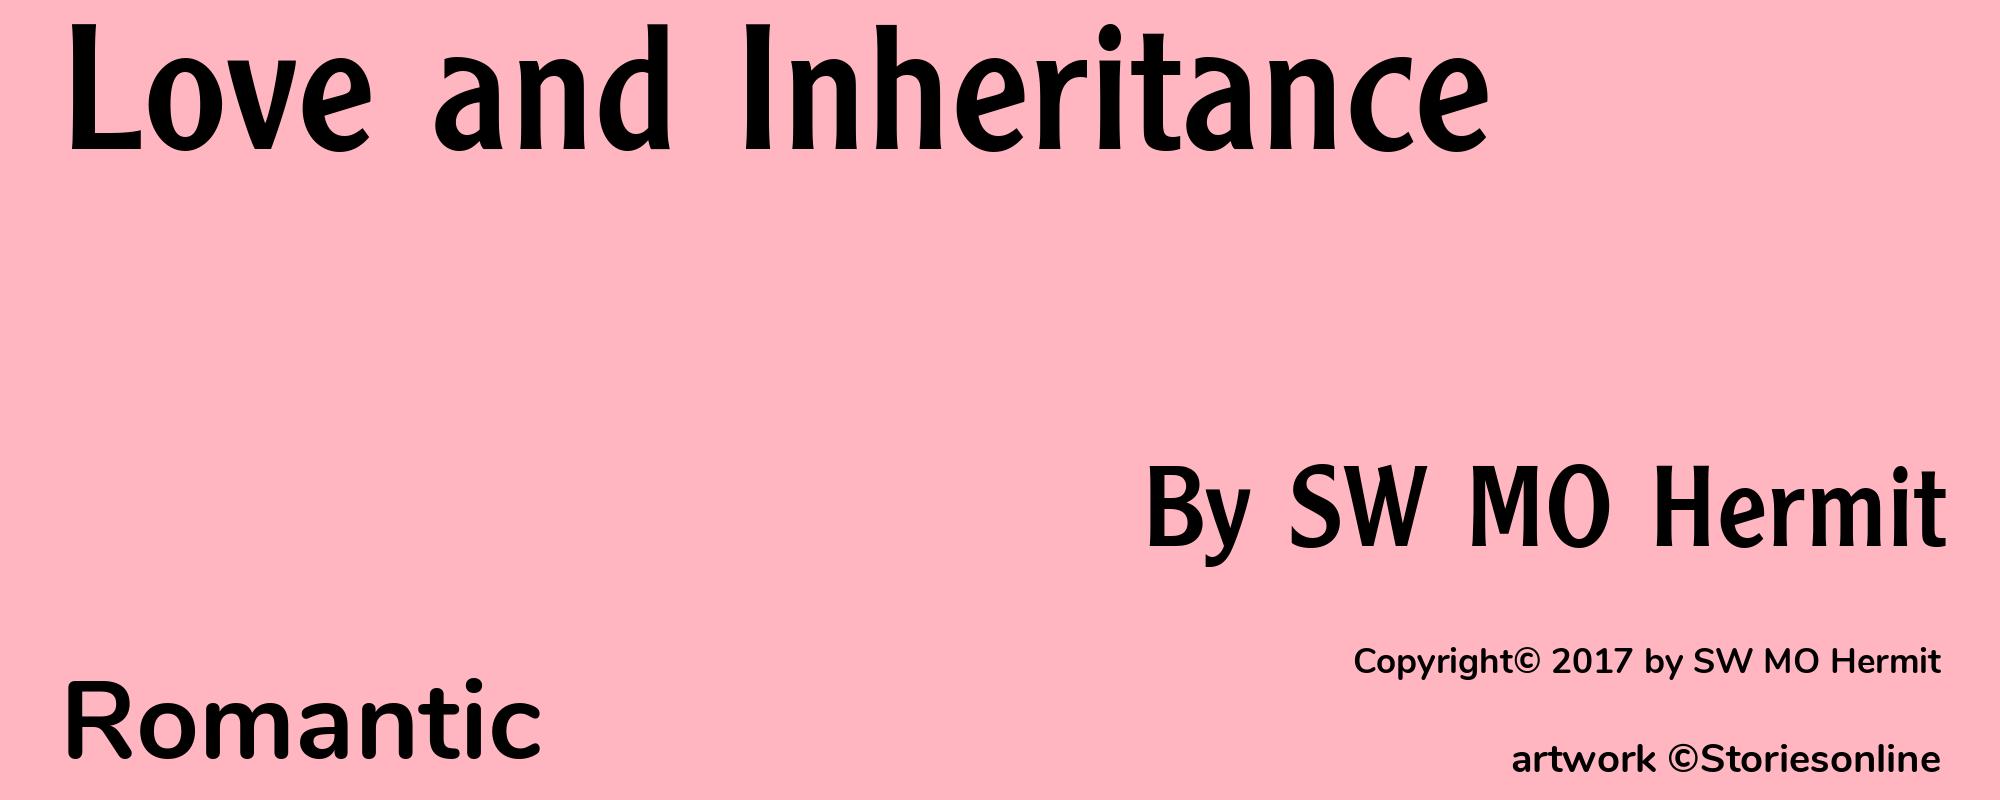 Love and Inheritance - Cover